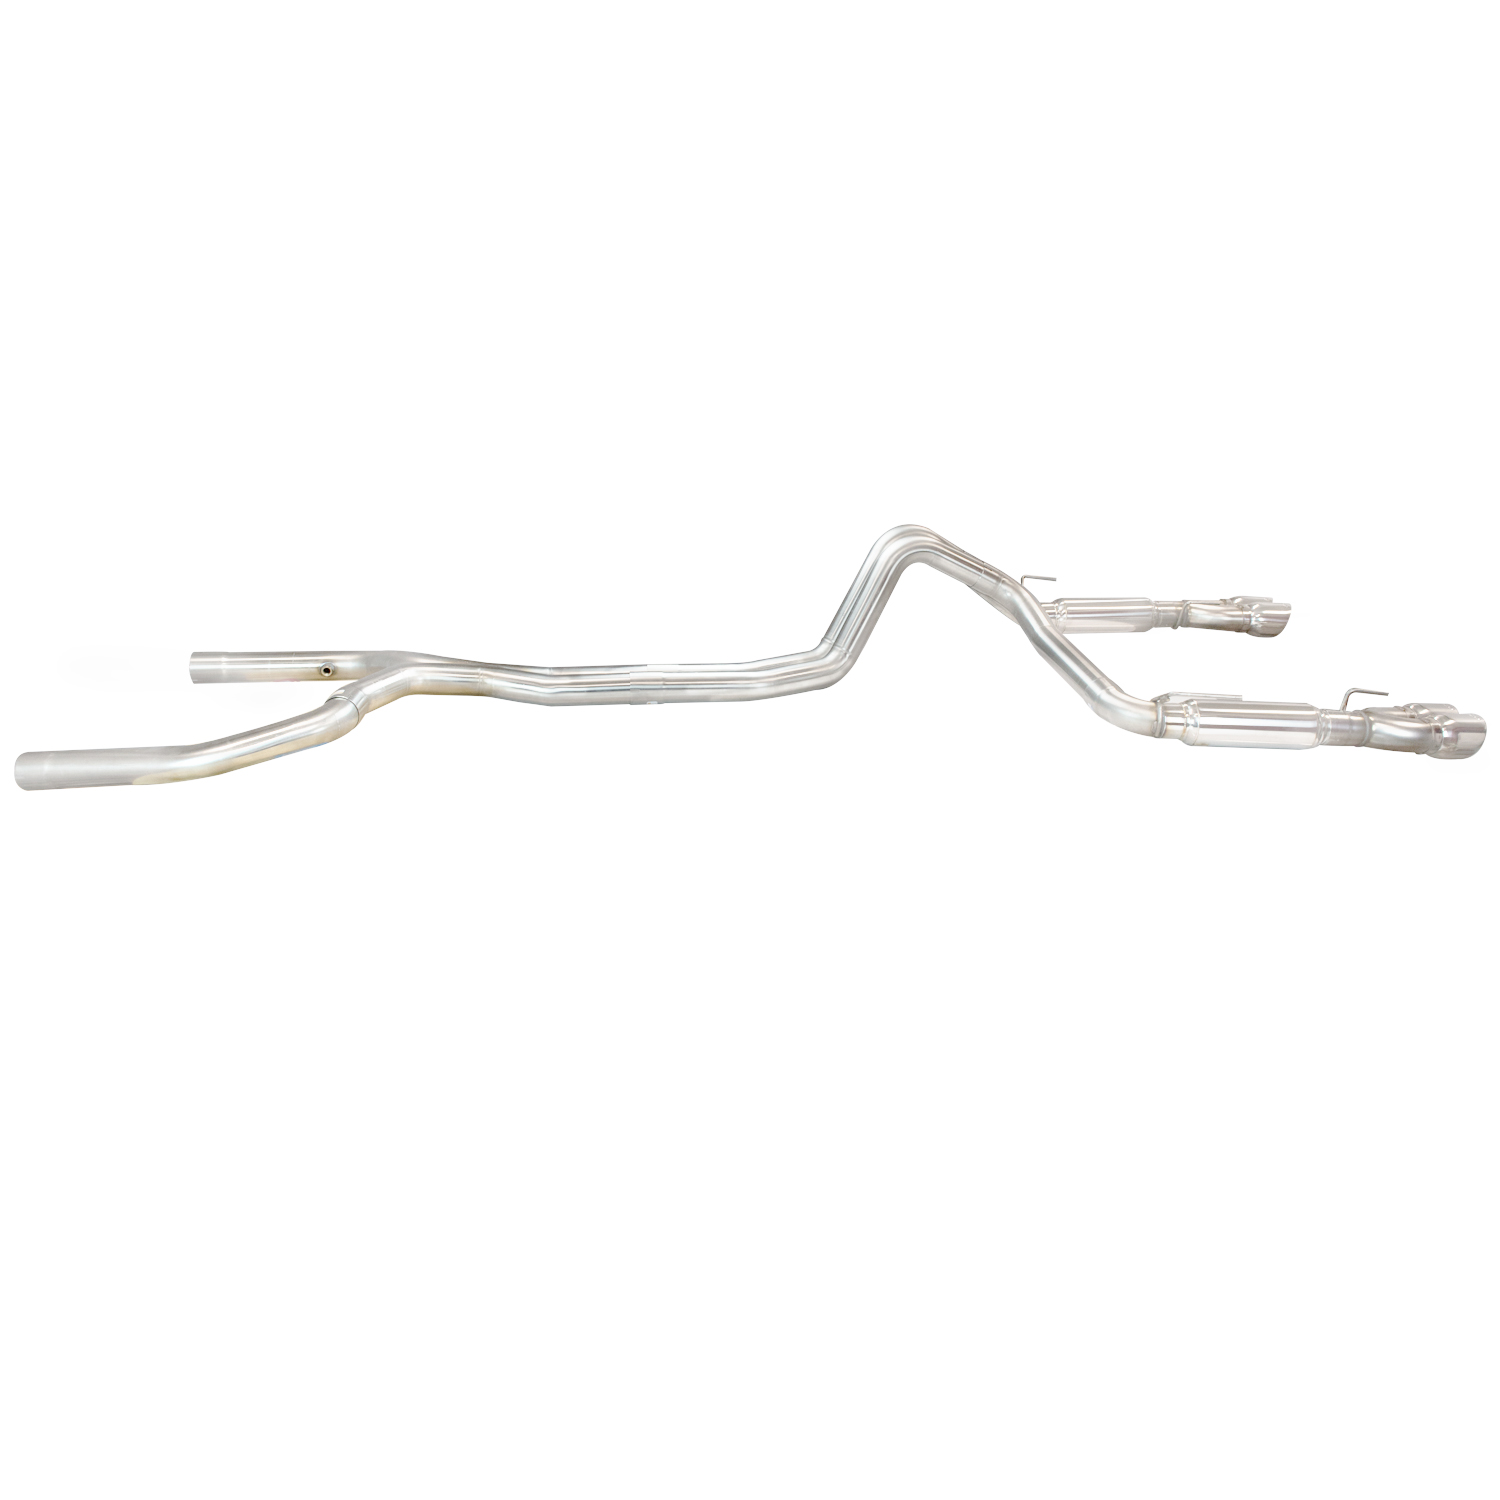 True Dual Exhaust System 3" Non Catted Incl. 3 x Pipe w/Pol. SS Race Mufflers/Pol. 4" Quad Tips-Firebird